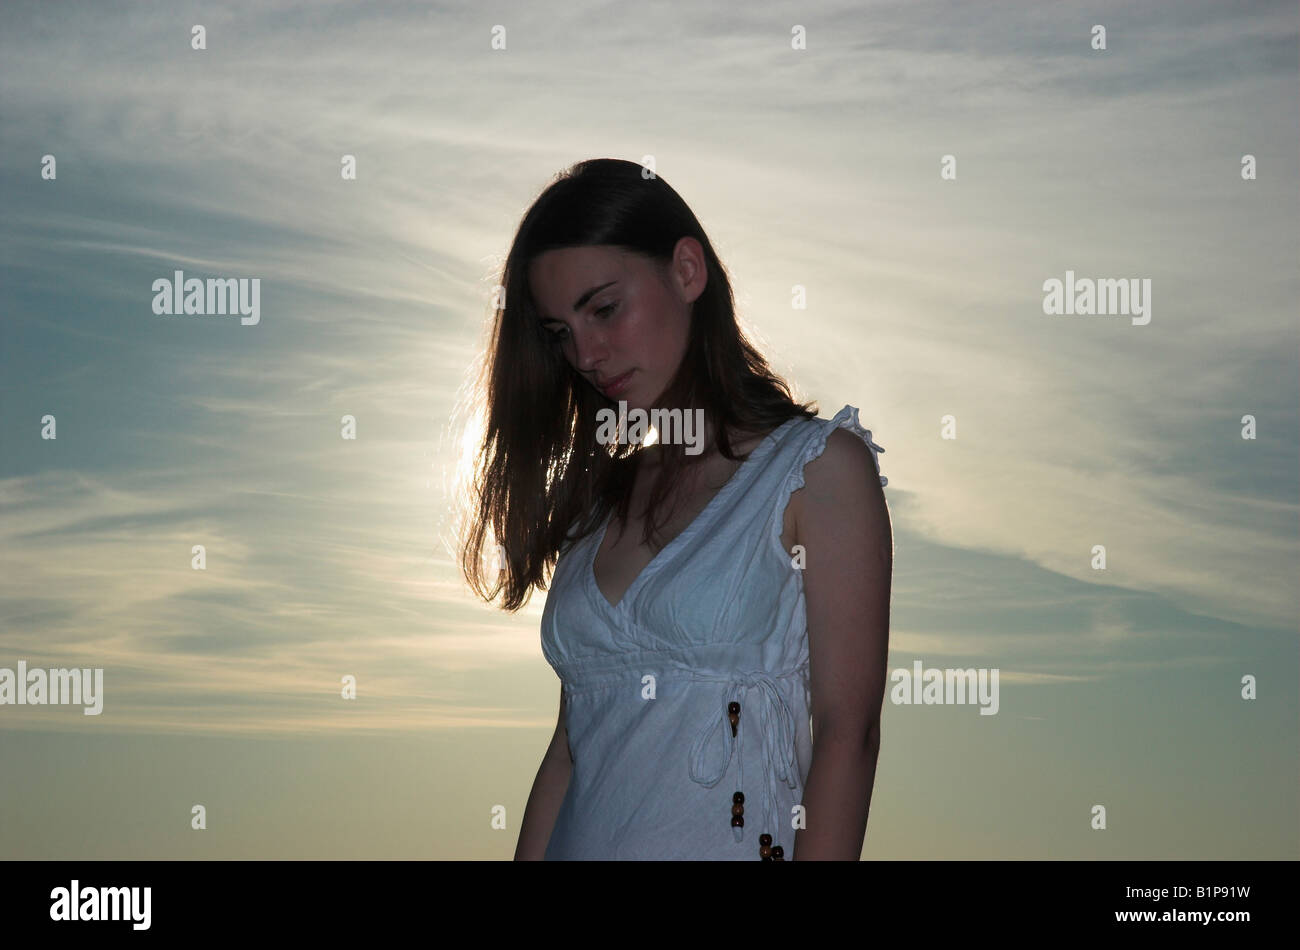 Silhouette of a young woman wearing white dress standing outdoors at dusk sun shining behind head bowed Stock Photo